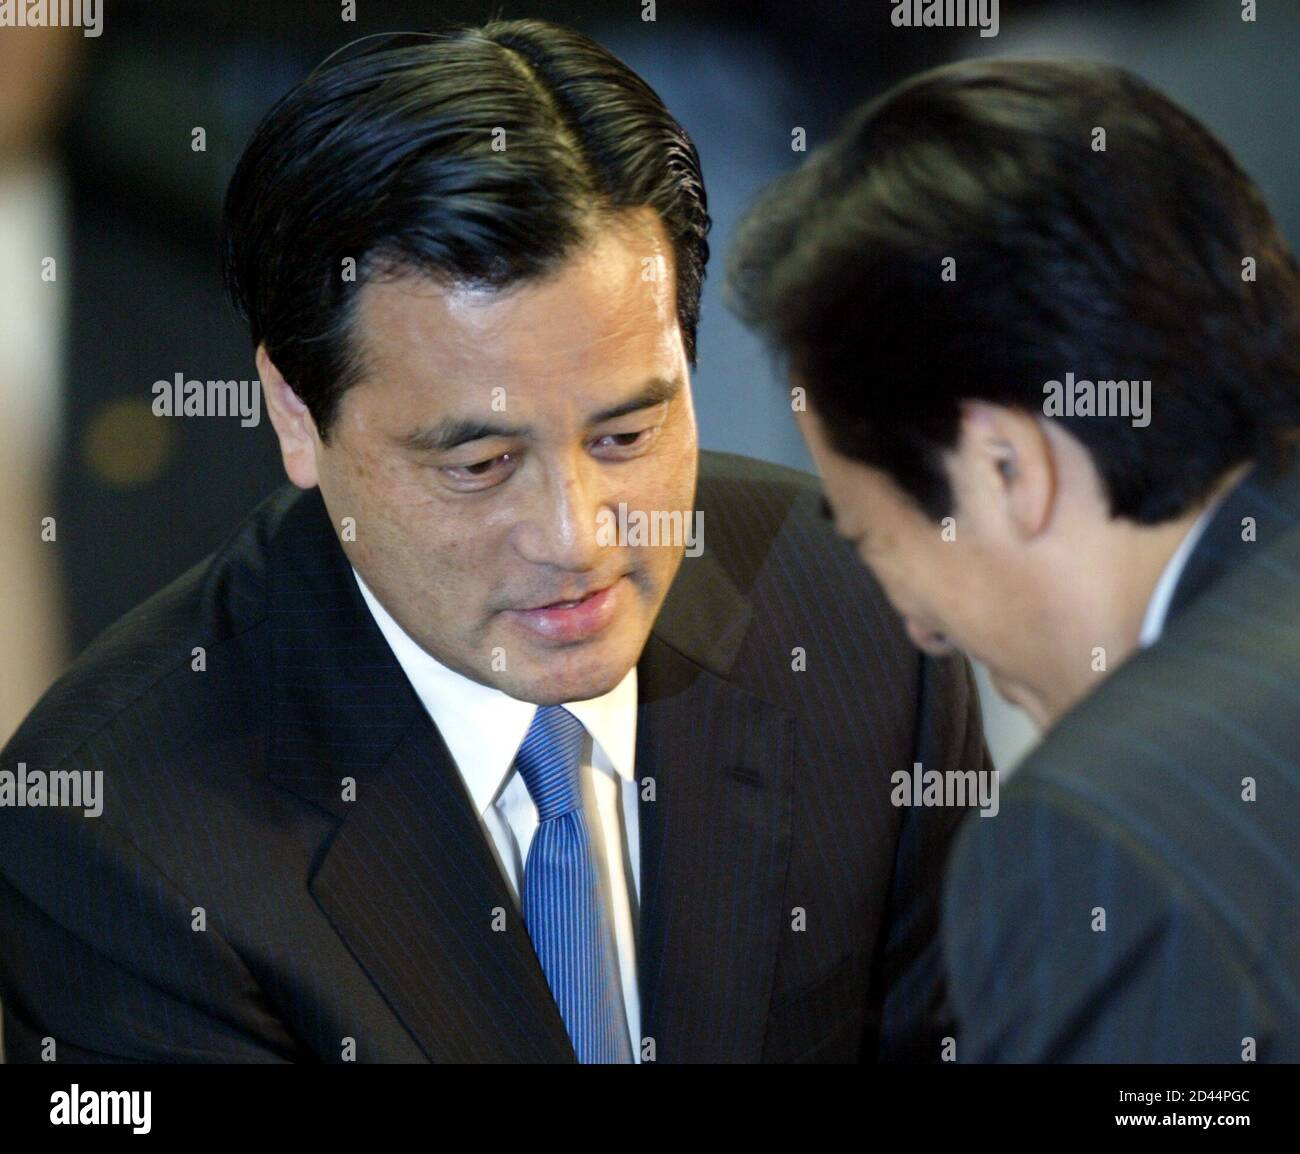 Katsuya Okada, Japan's newly elected opposition Democratic Party leader, greets fomer party leader Naoto Kan at the party's headquarters in Tokyo May 18, 2004. Hit by a furore over missed pension payments that has also ensnared the prime minister, Japan's main opposition party on Tuesday turned to its defacto campaign manager to become leader and rally the ranks ahead of a July election. REUTERS/Issei Kato  IK/SH Stock Photo